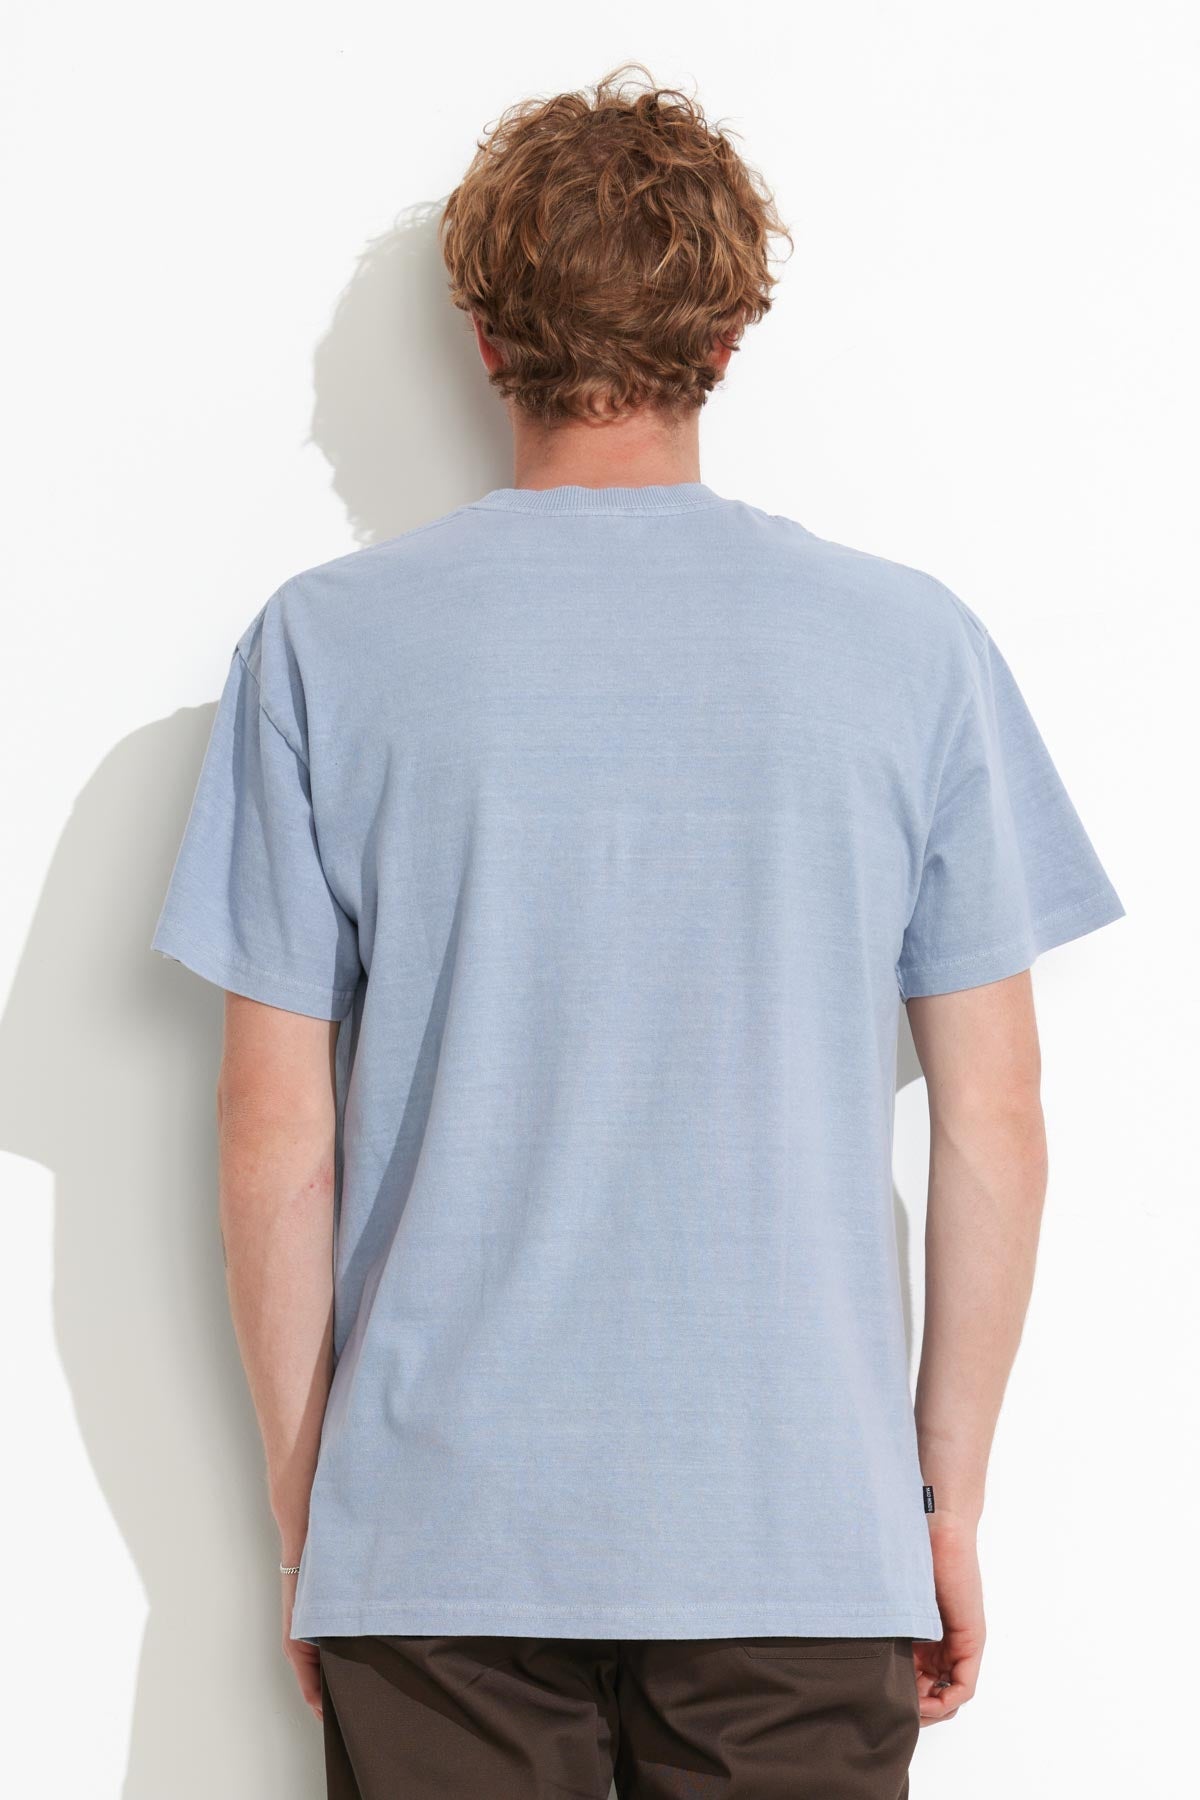 Misfit Shapes - Yeah Well What 50-50 SS Tee - Pigment Dusty Light Blue